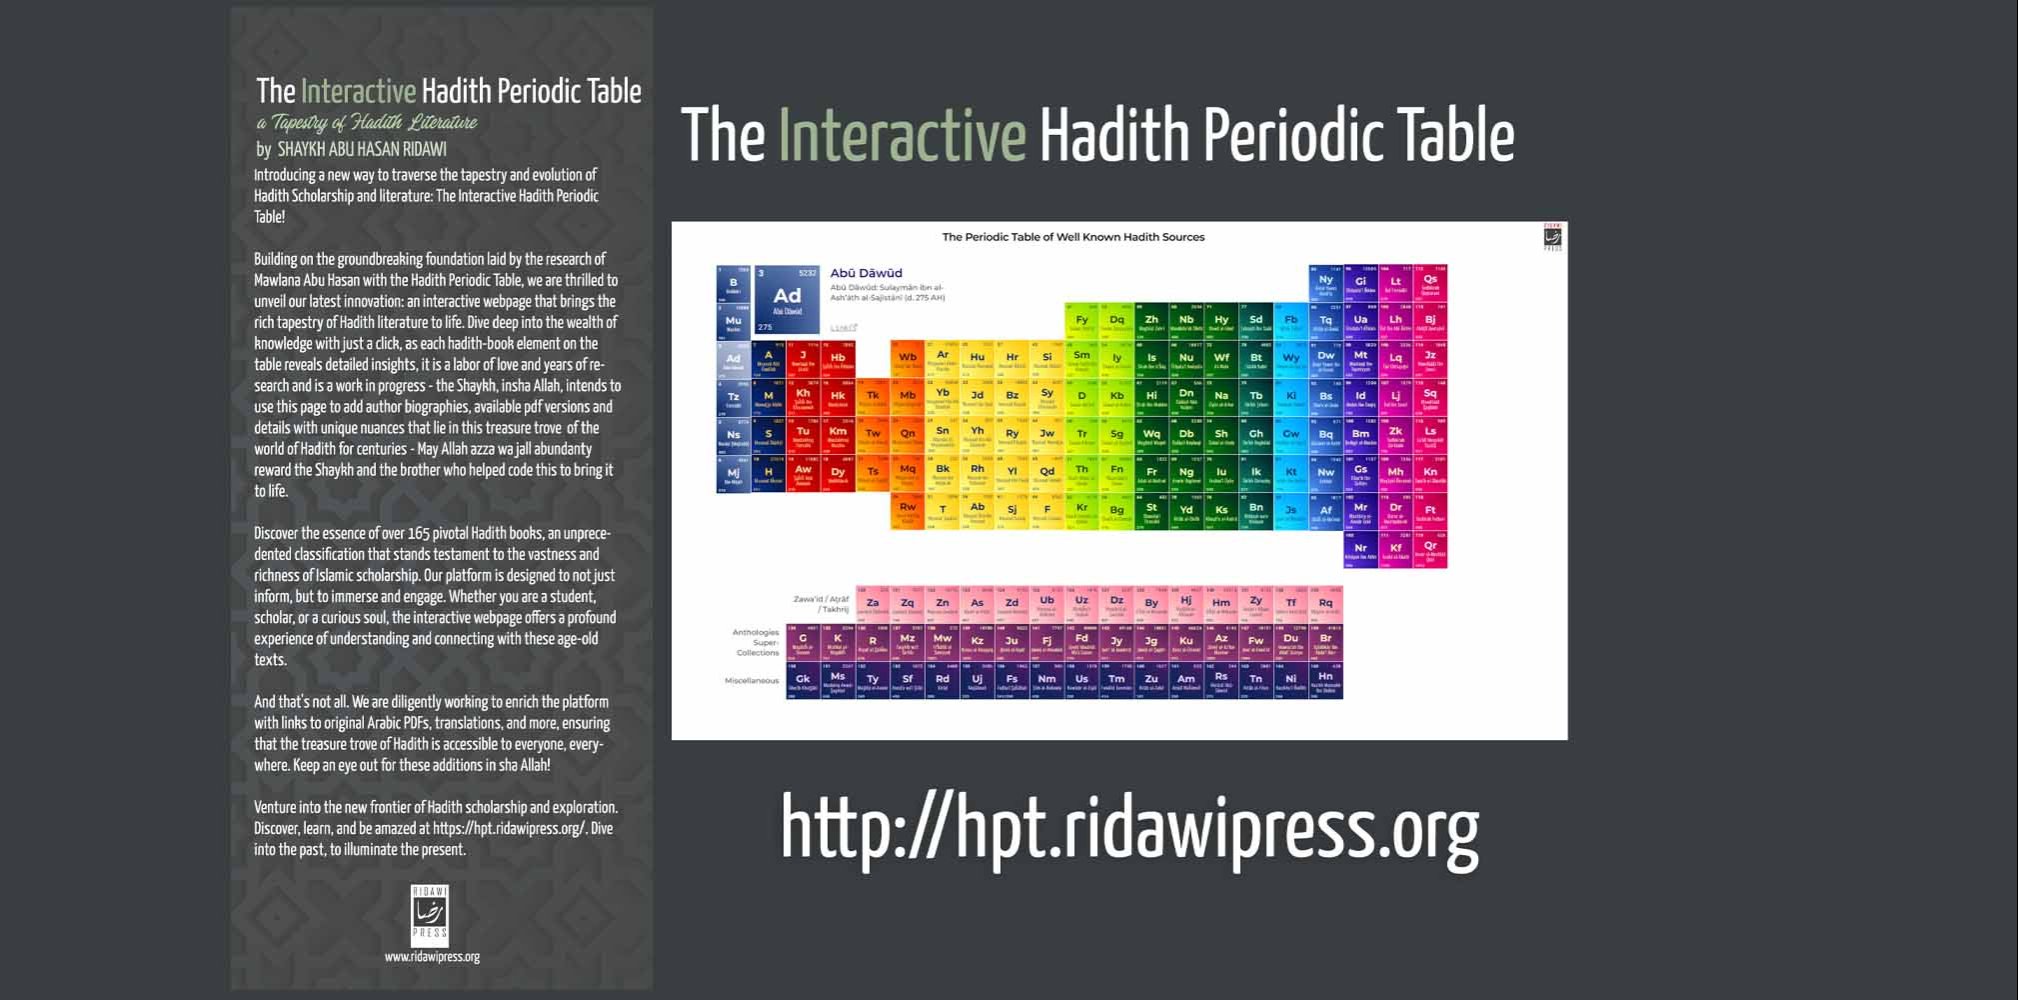 Launching : The Interactive Hadith Periodic Table